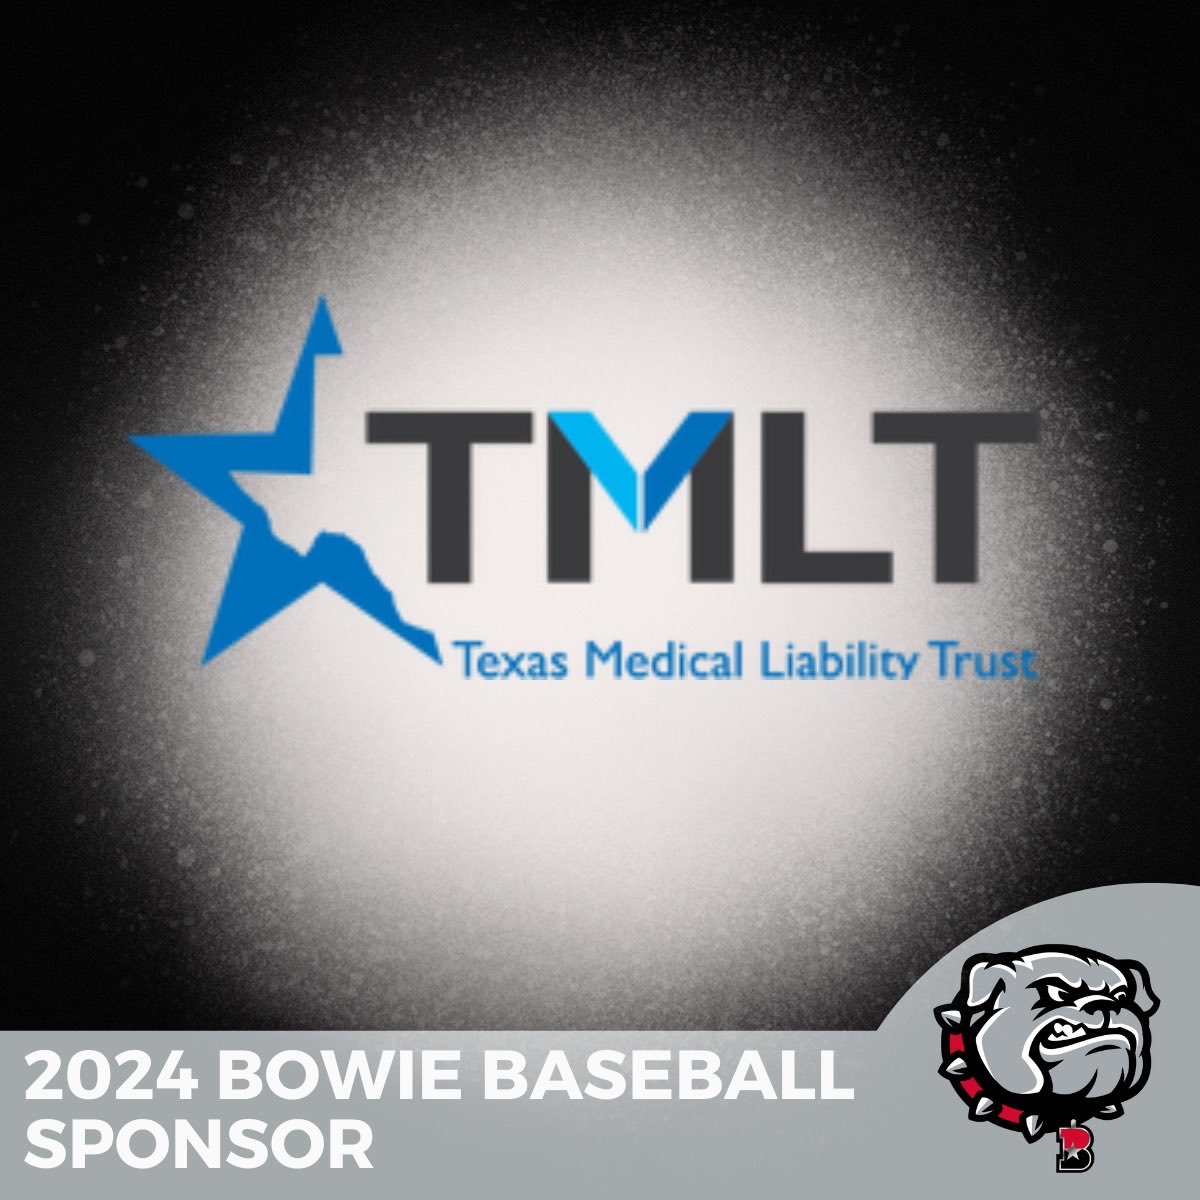 Thank you to our sponsor Texas Medical Liability Teist for their support of Bowie Baseball!